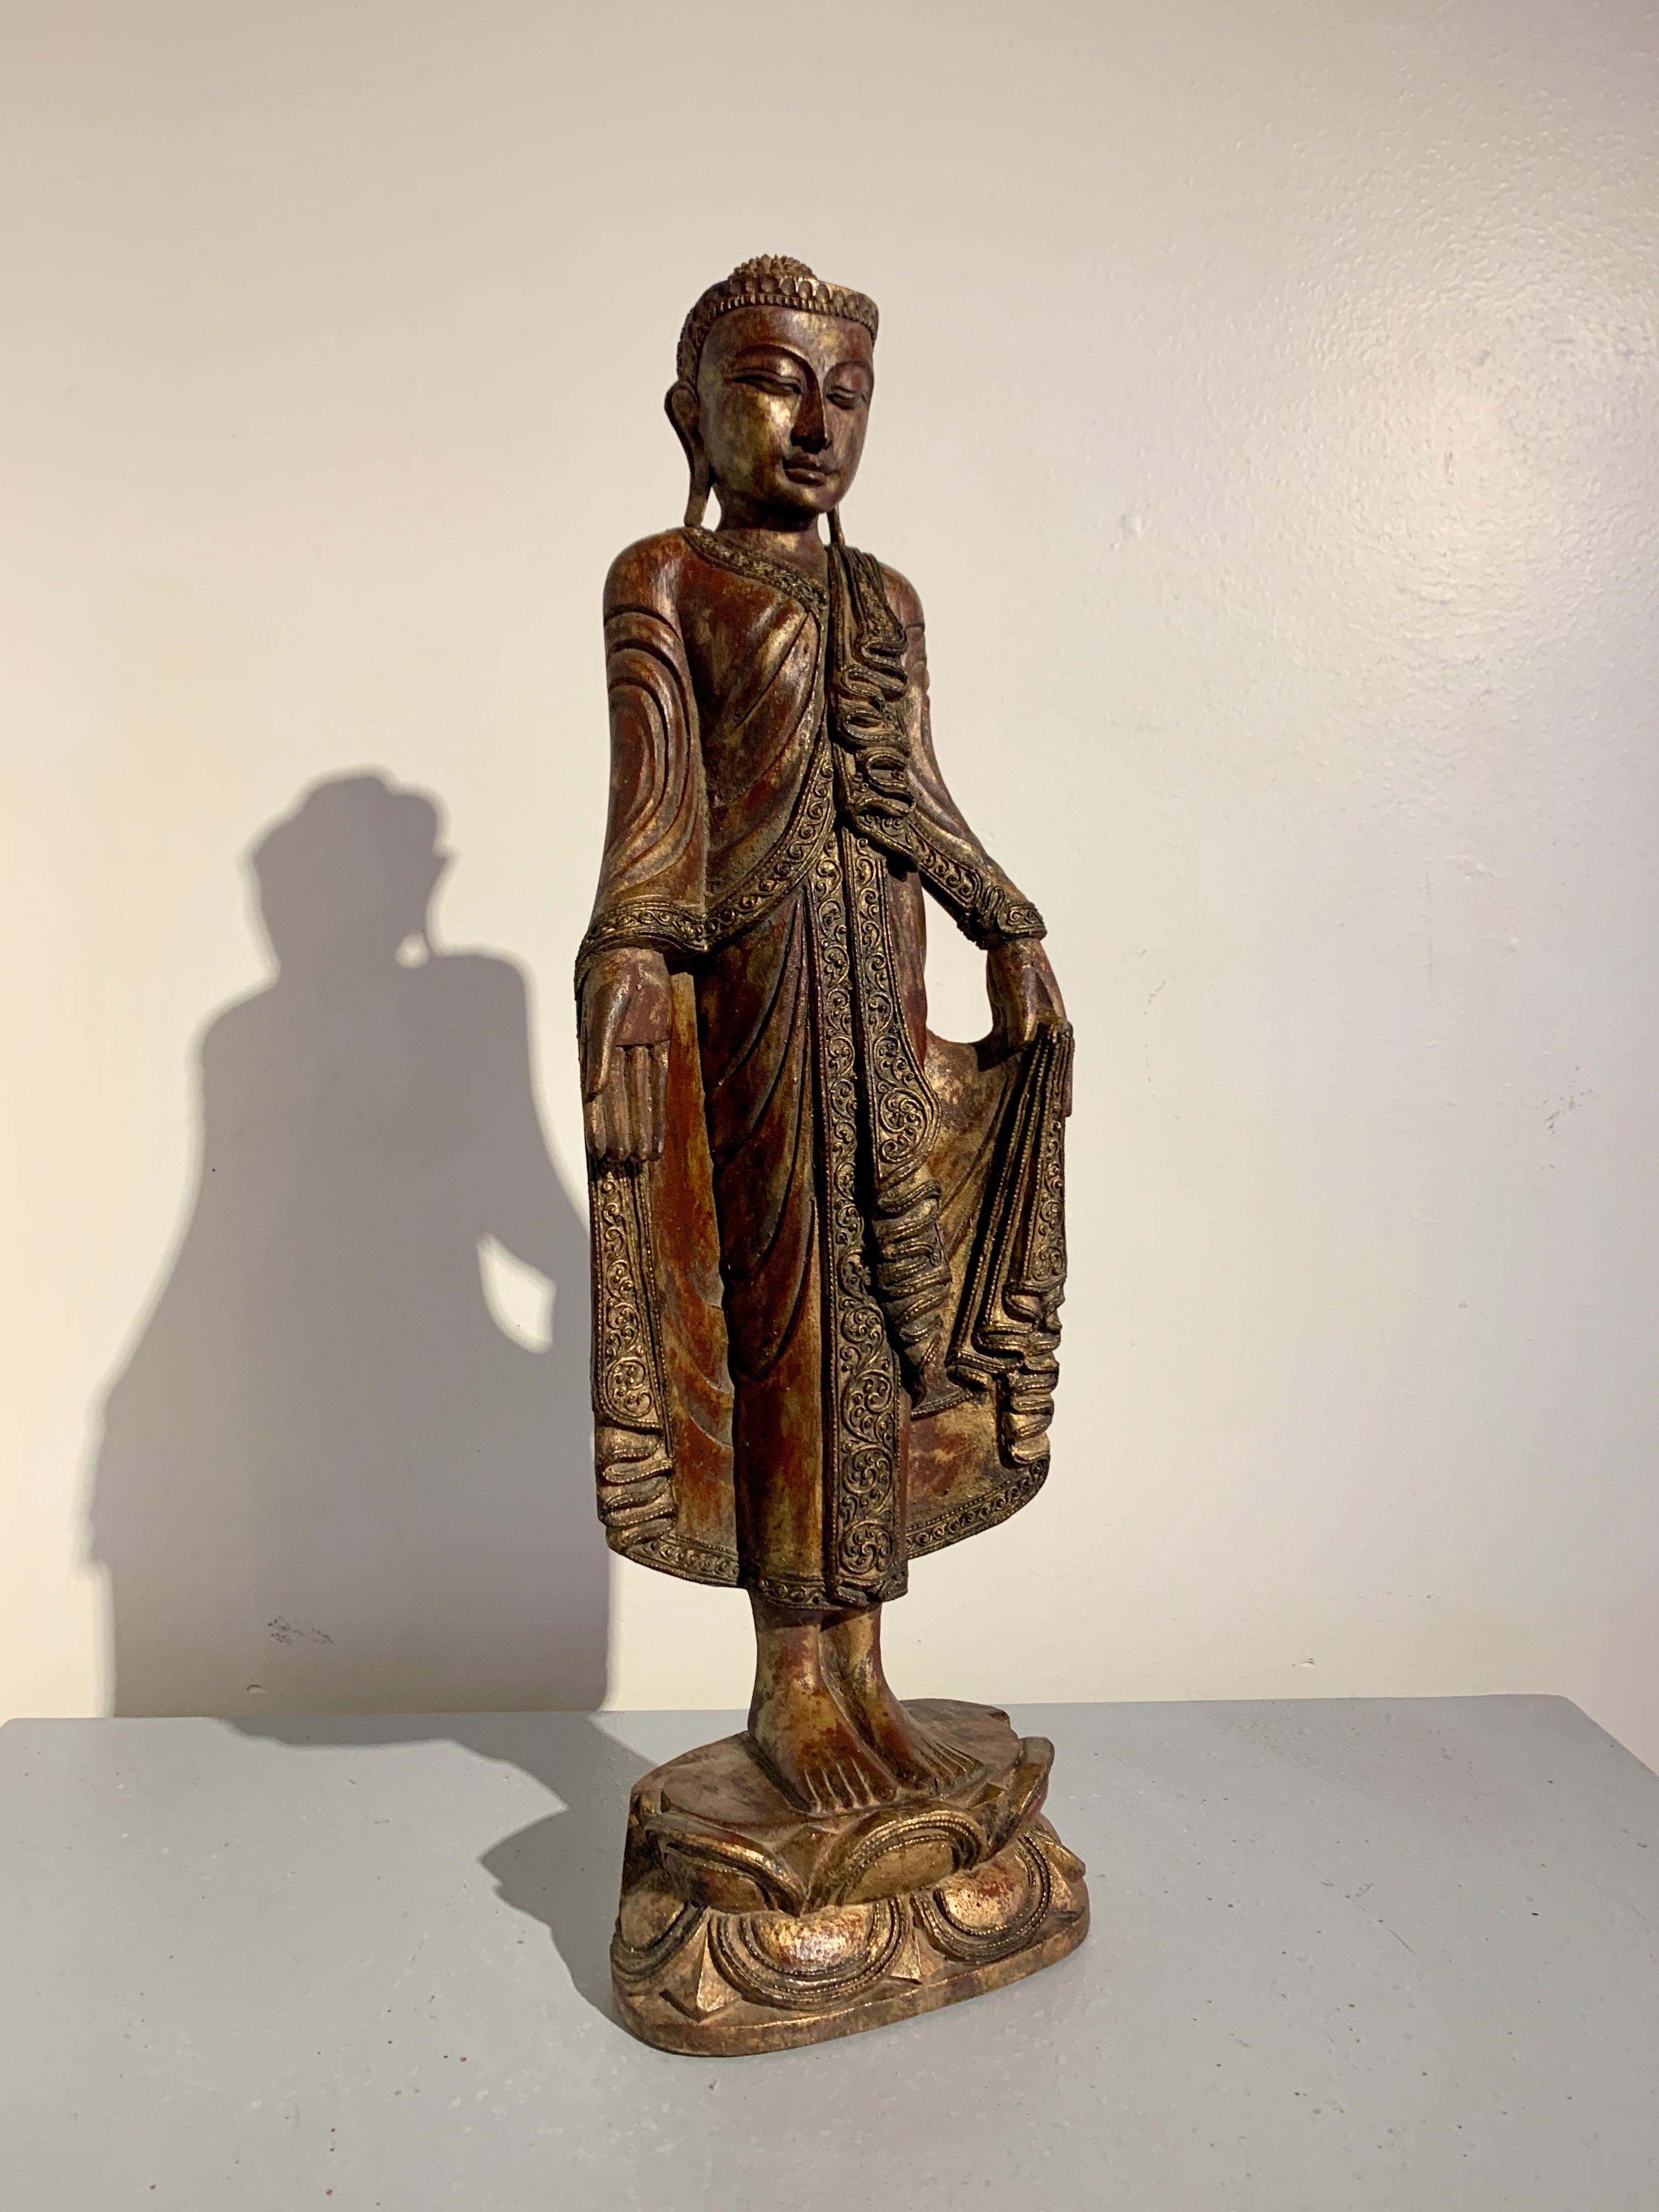 An enchanting Burmese carved hardwood, lacquered and gilt standing Buddha in the Mandalay style, early to mid 20th century, Myanmar (Burma). 

The regal Buddha is portrayed standing upon a stylized double lotus pedestal. He is dressed in heavy,